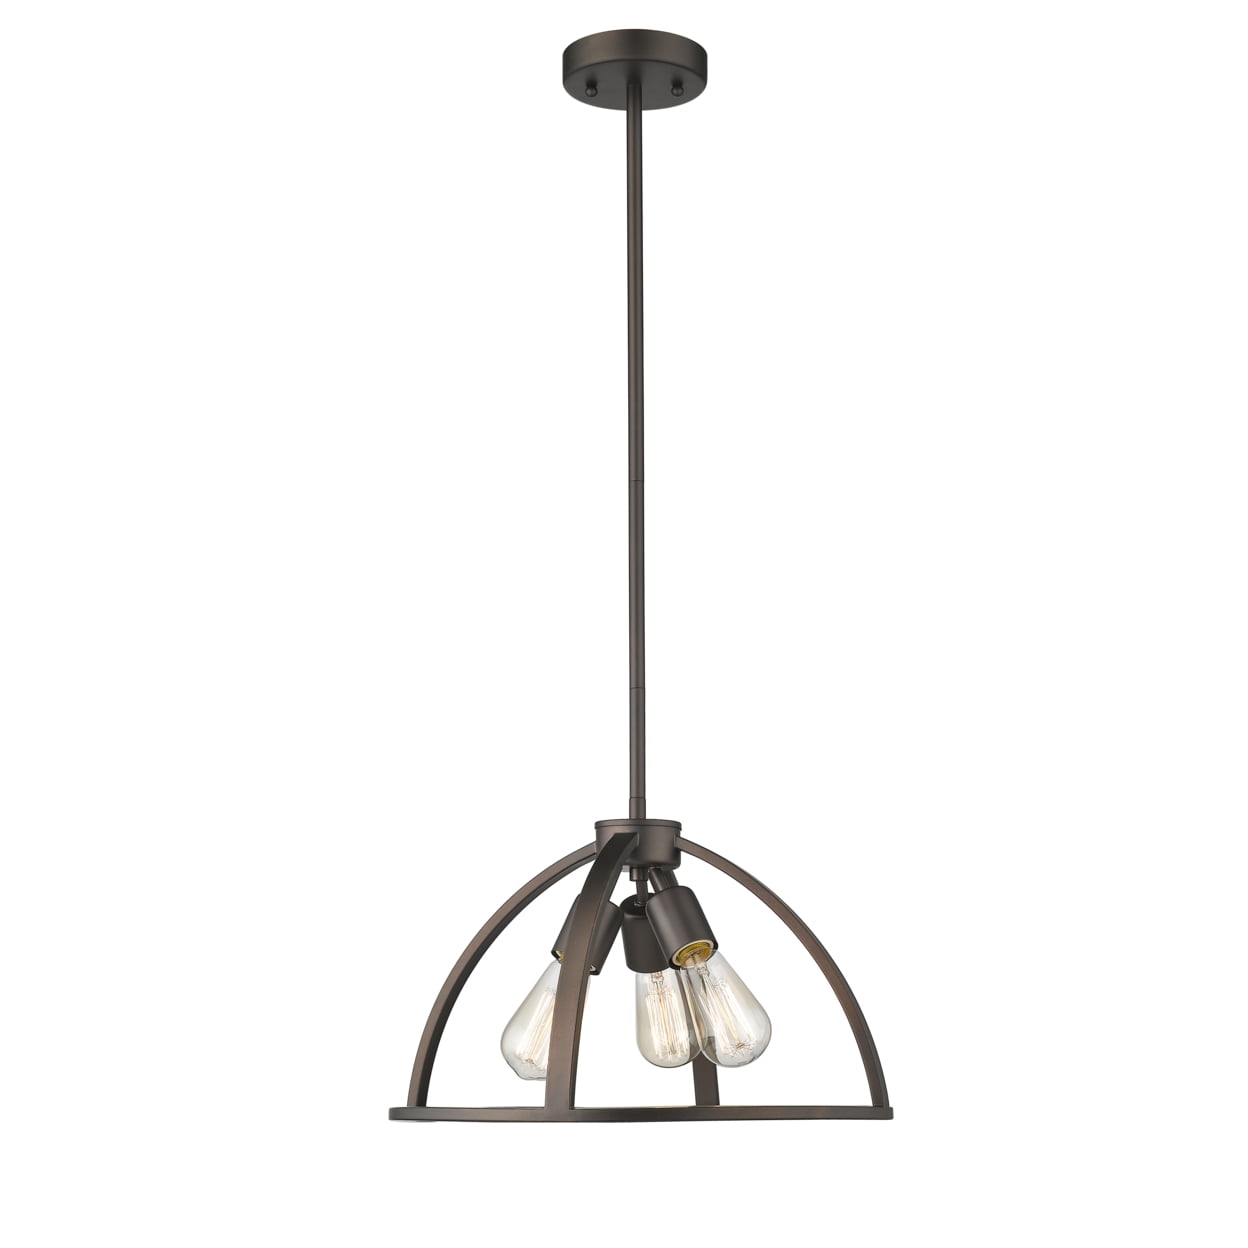 Ch2d503rb16-dp3 Ironclad Industrial 3 Light Rubbed Bronze Ceiling Pendant - 16 In.